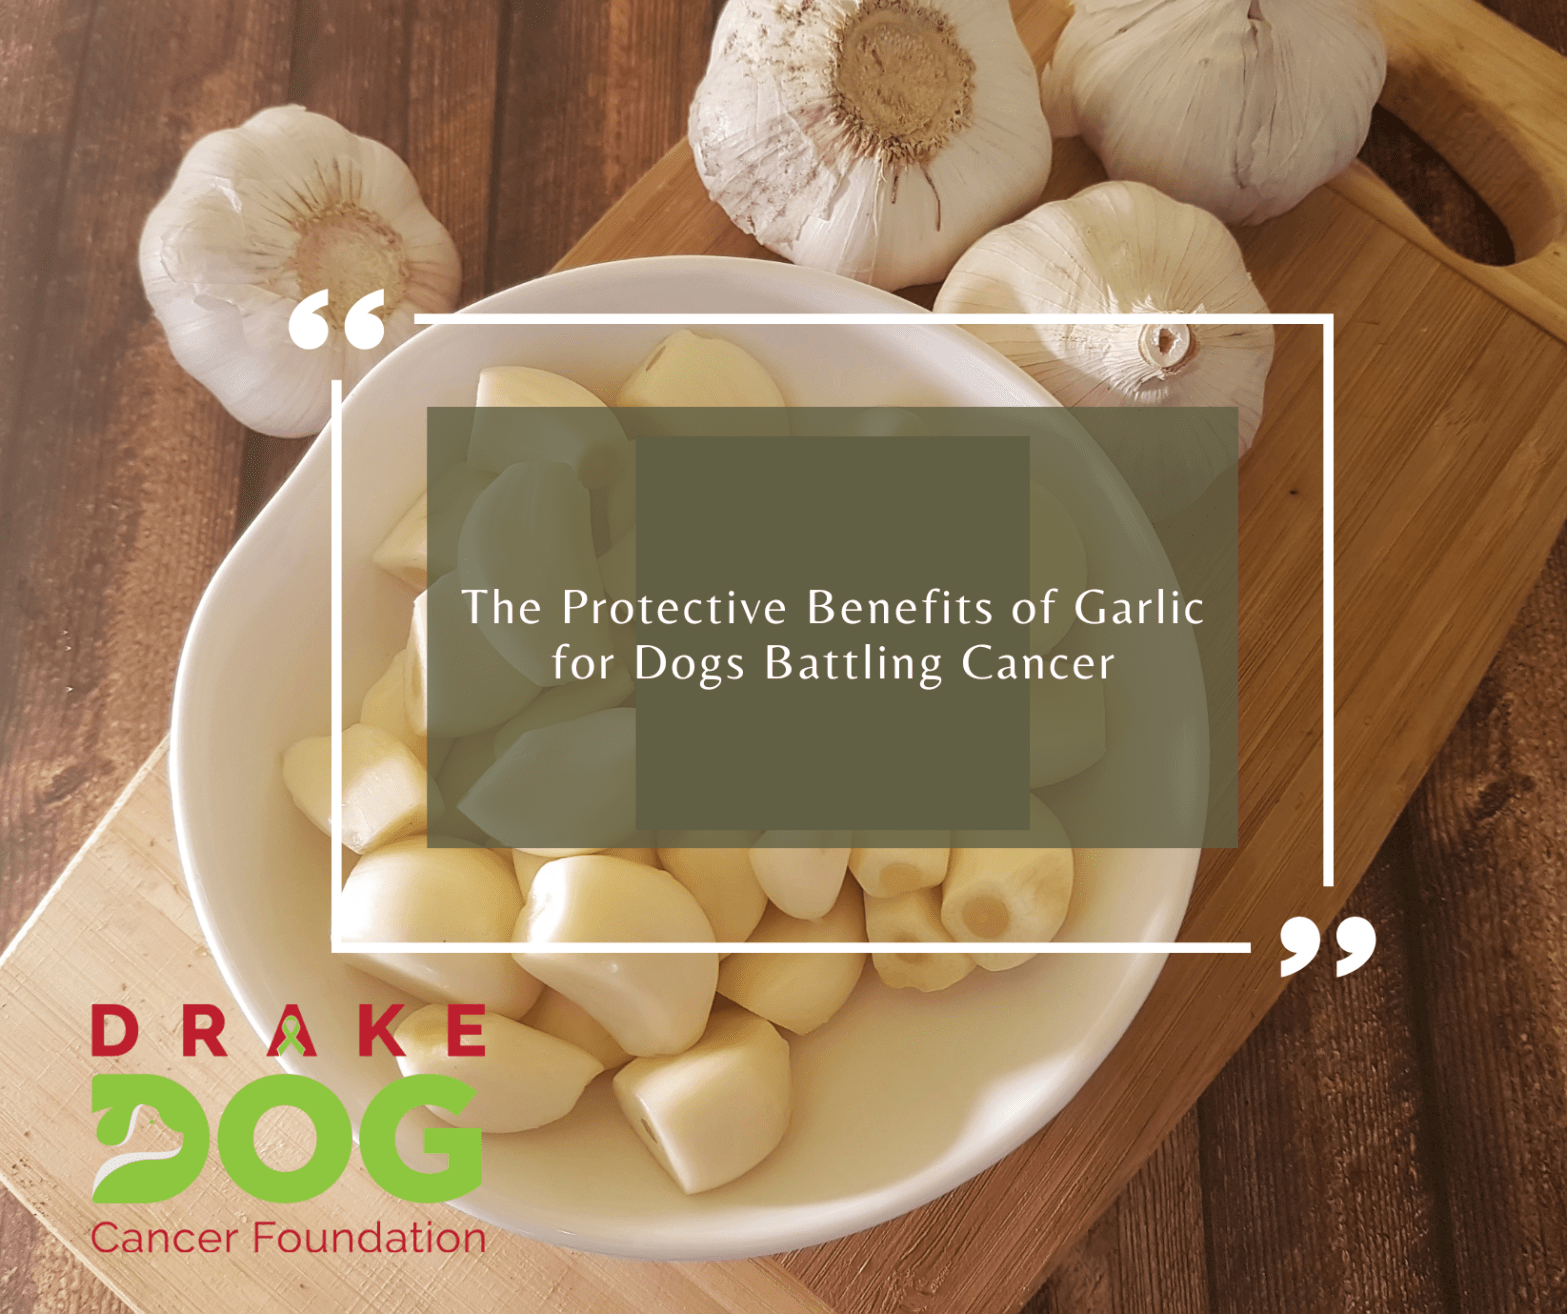 The Protective Benefits of Garlic for Dogs Battling Cancer